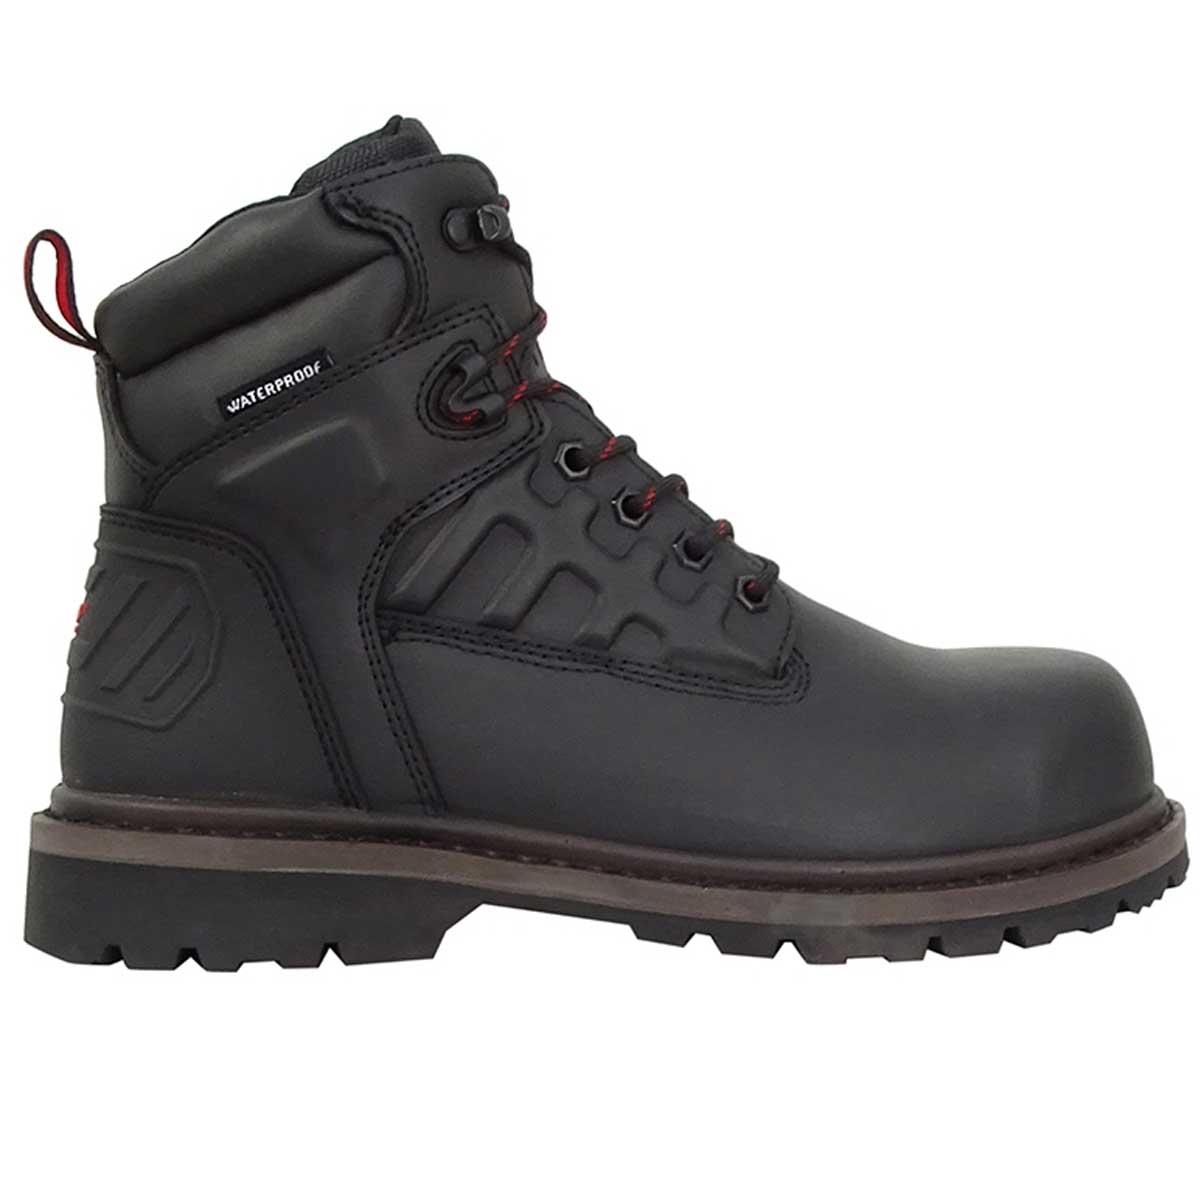 HOGGS OF FIFE Hercules Safety Lace-up Boots - Mens - Black